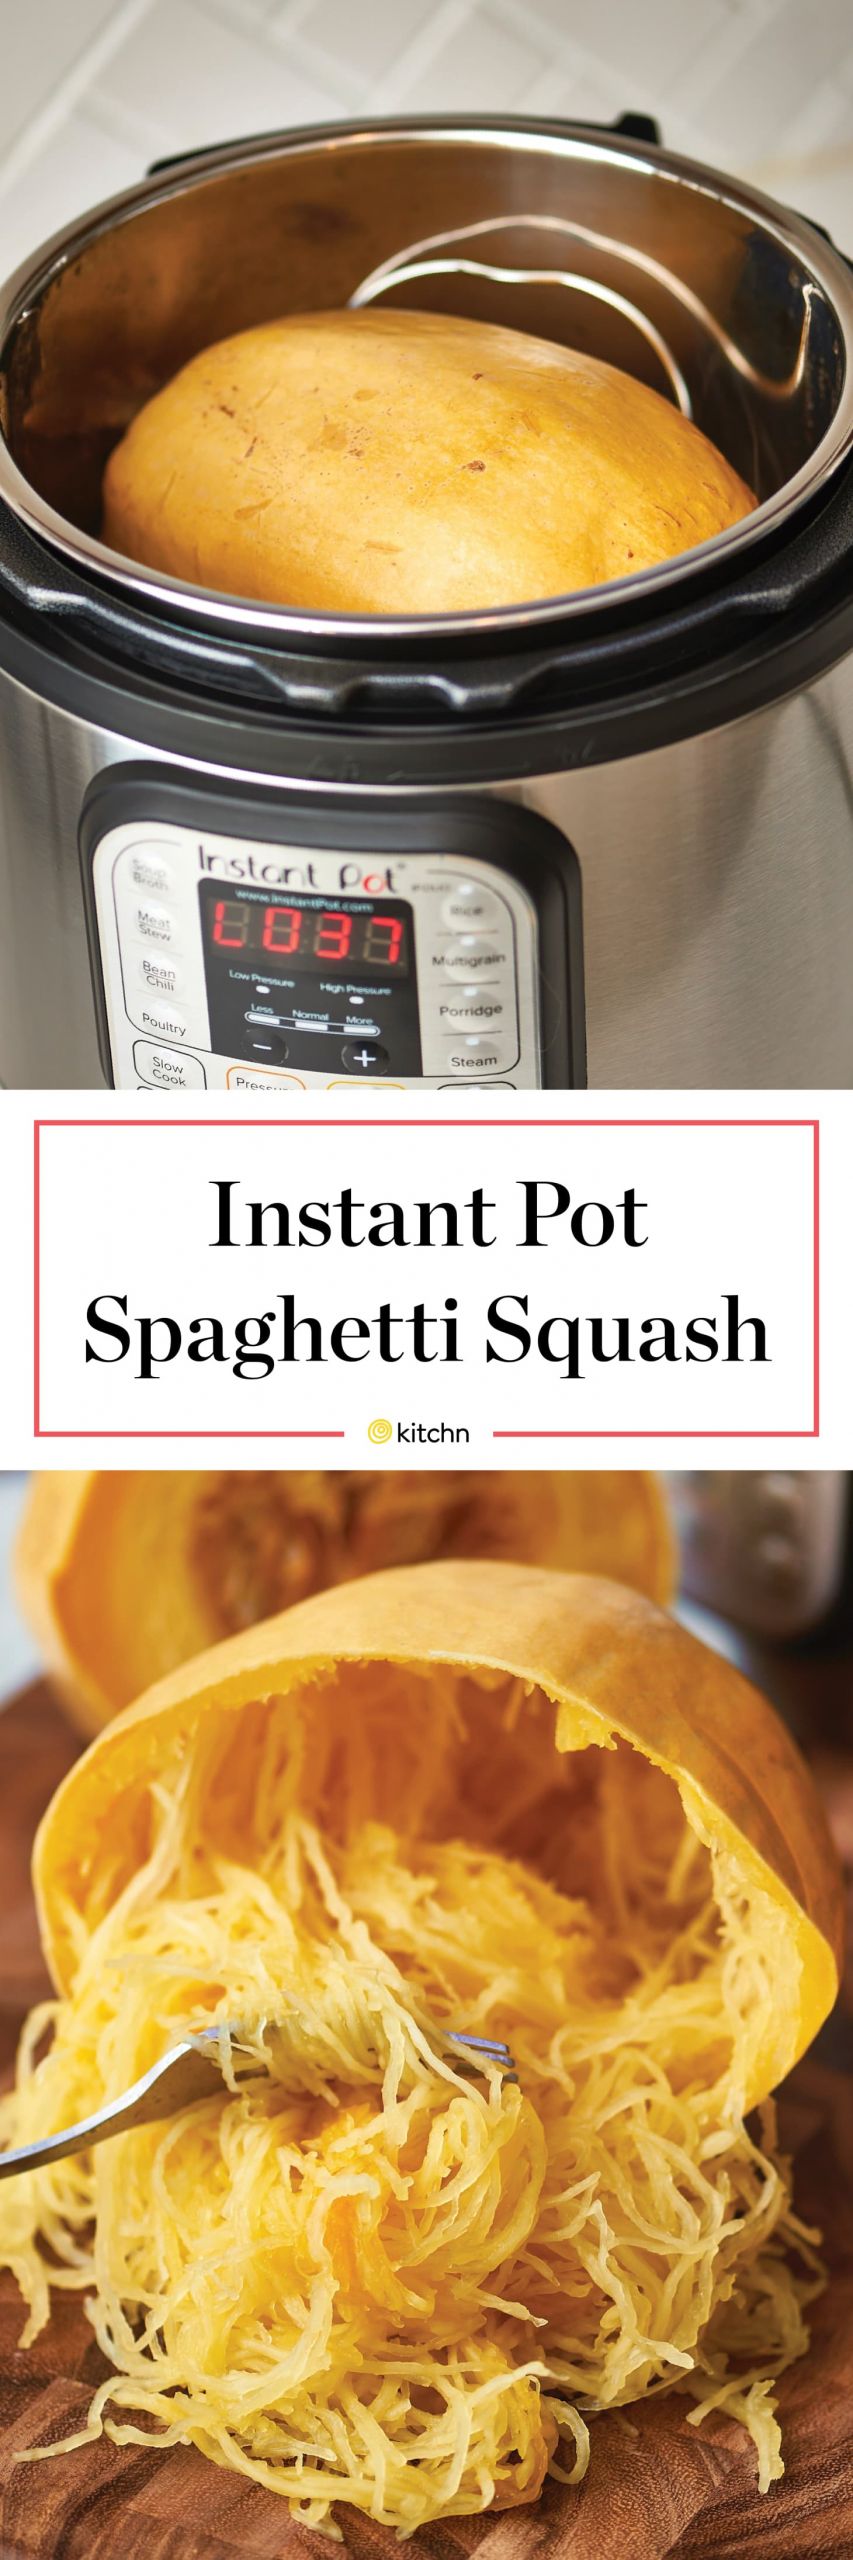 Pressure Cooking Spaghetti Squash
 How To Cook Spaghetti Squash in an Electric Pressure